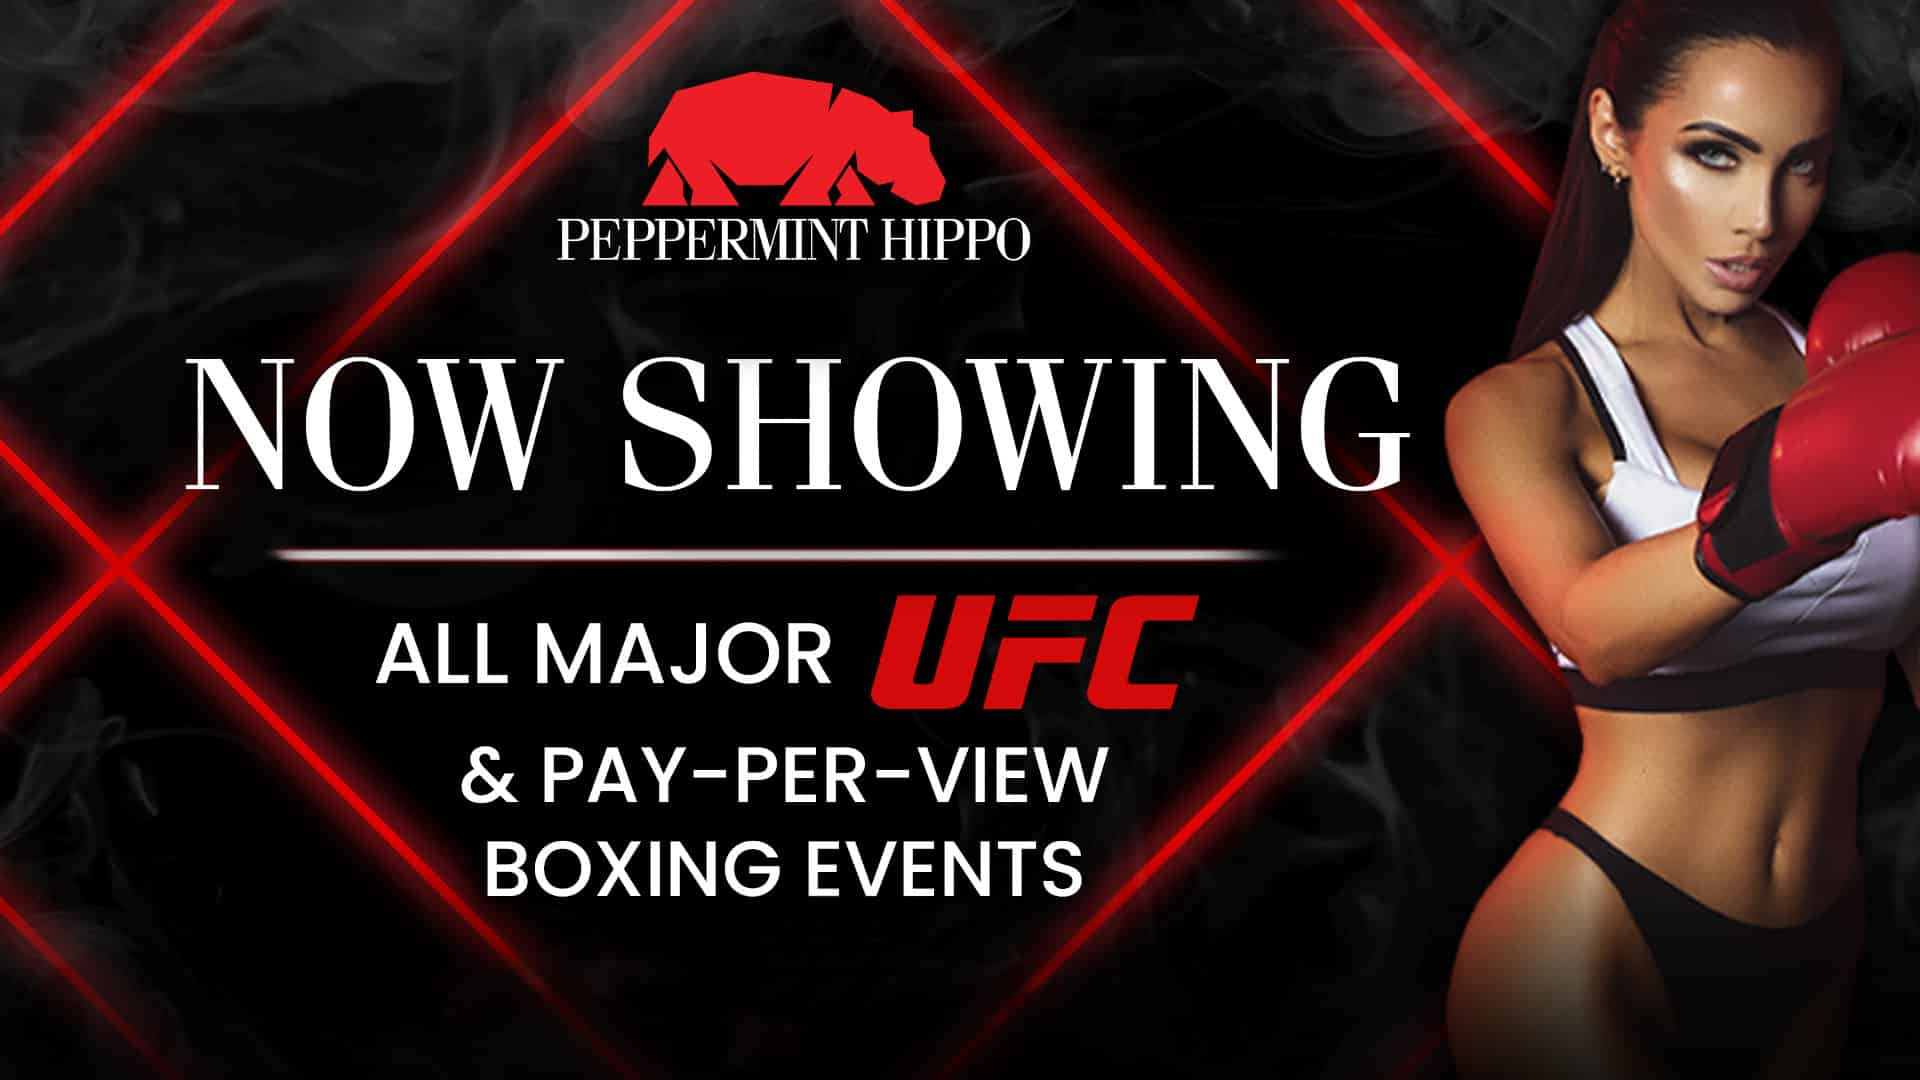 Watch all major UFC at Peppermint Hippo